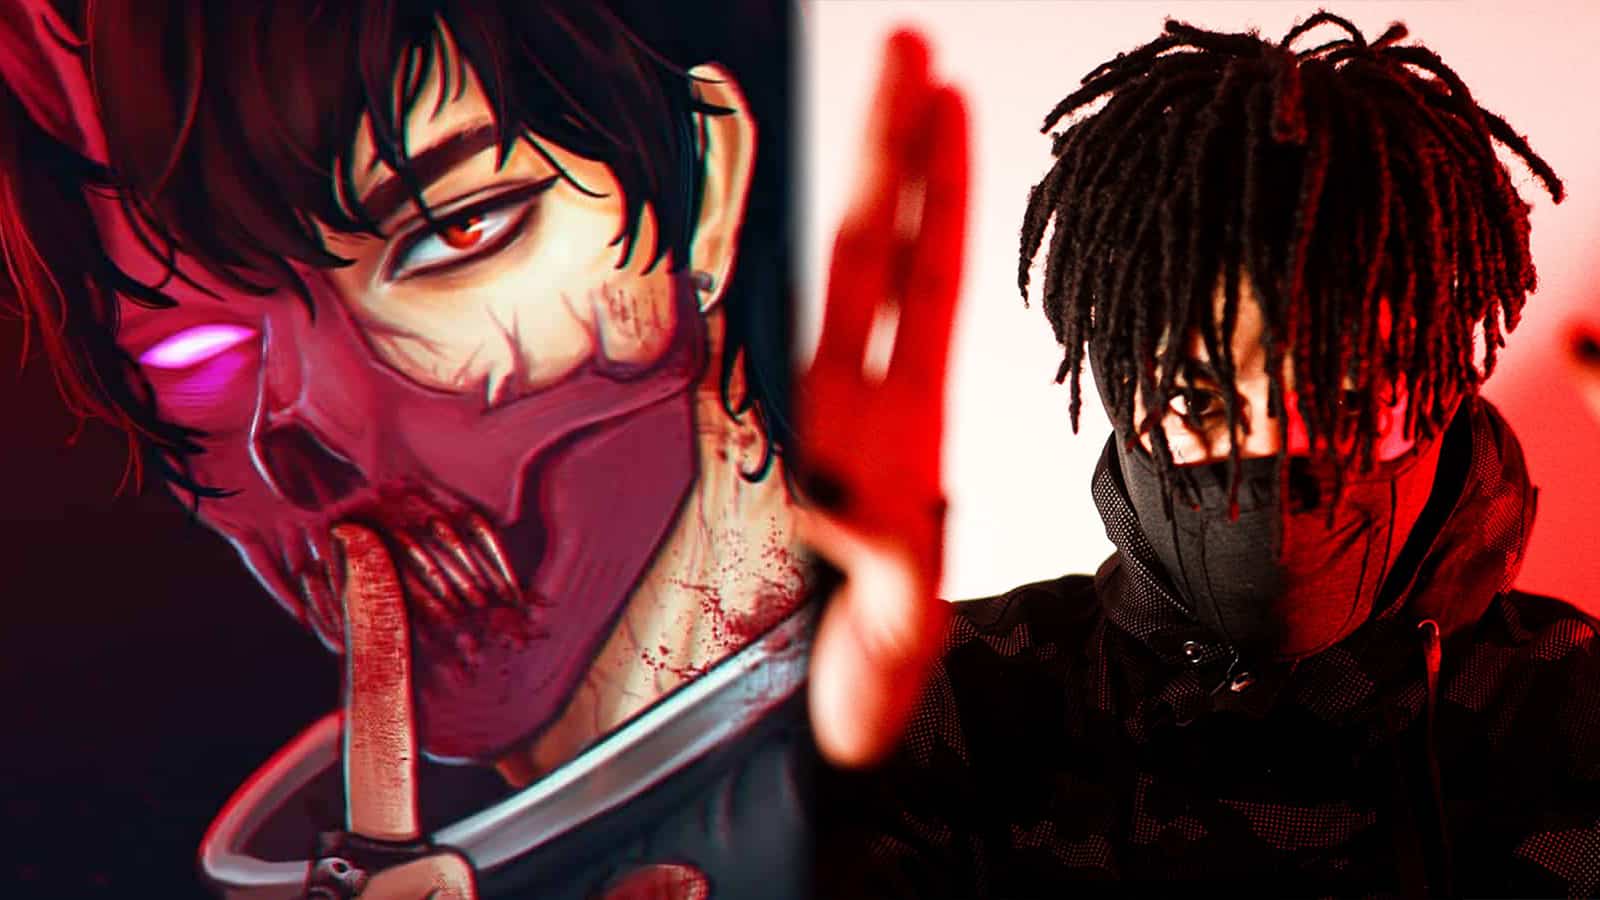 Corpse Husband collabing with scarlxrd on new song